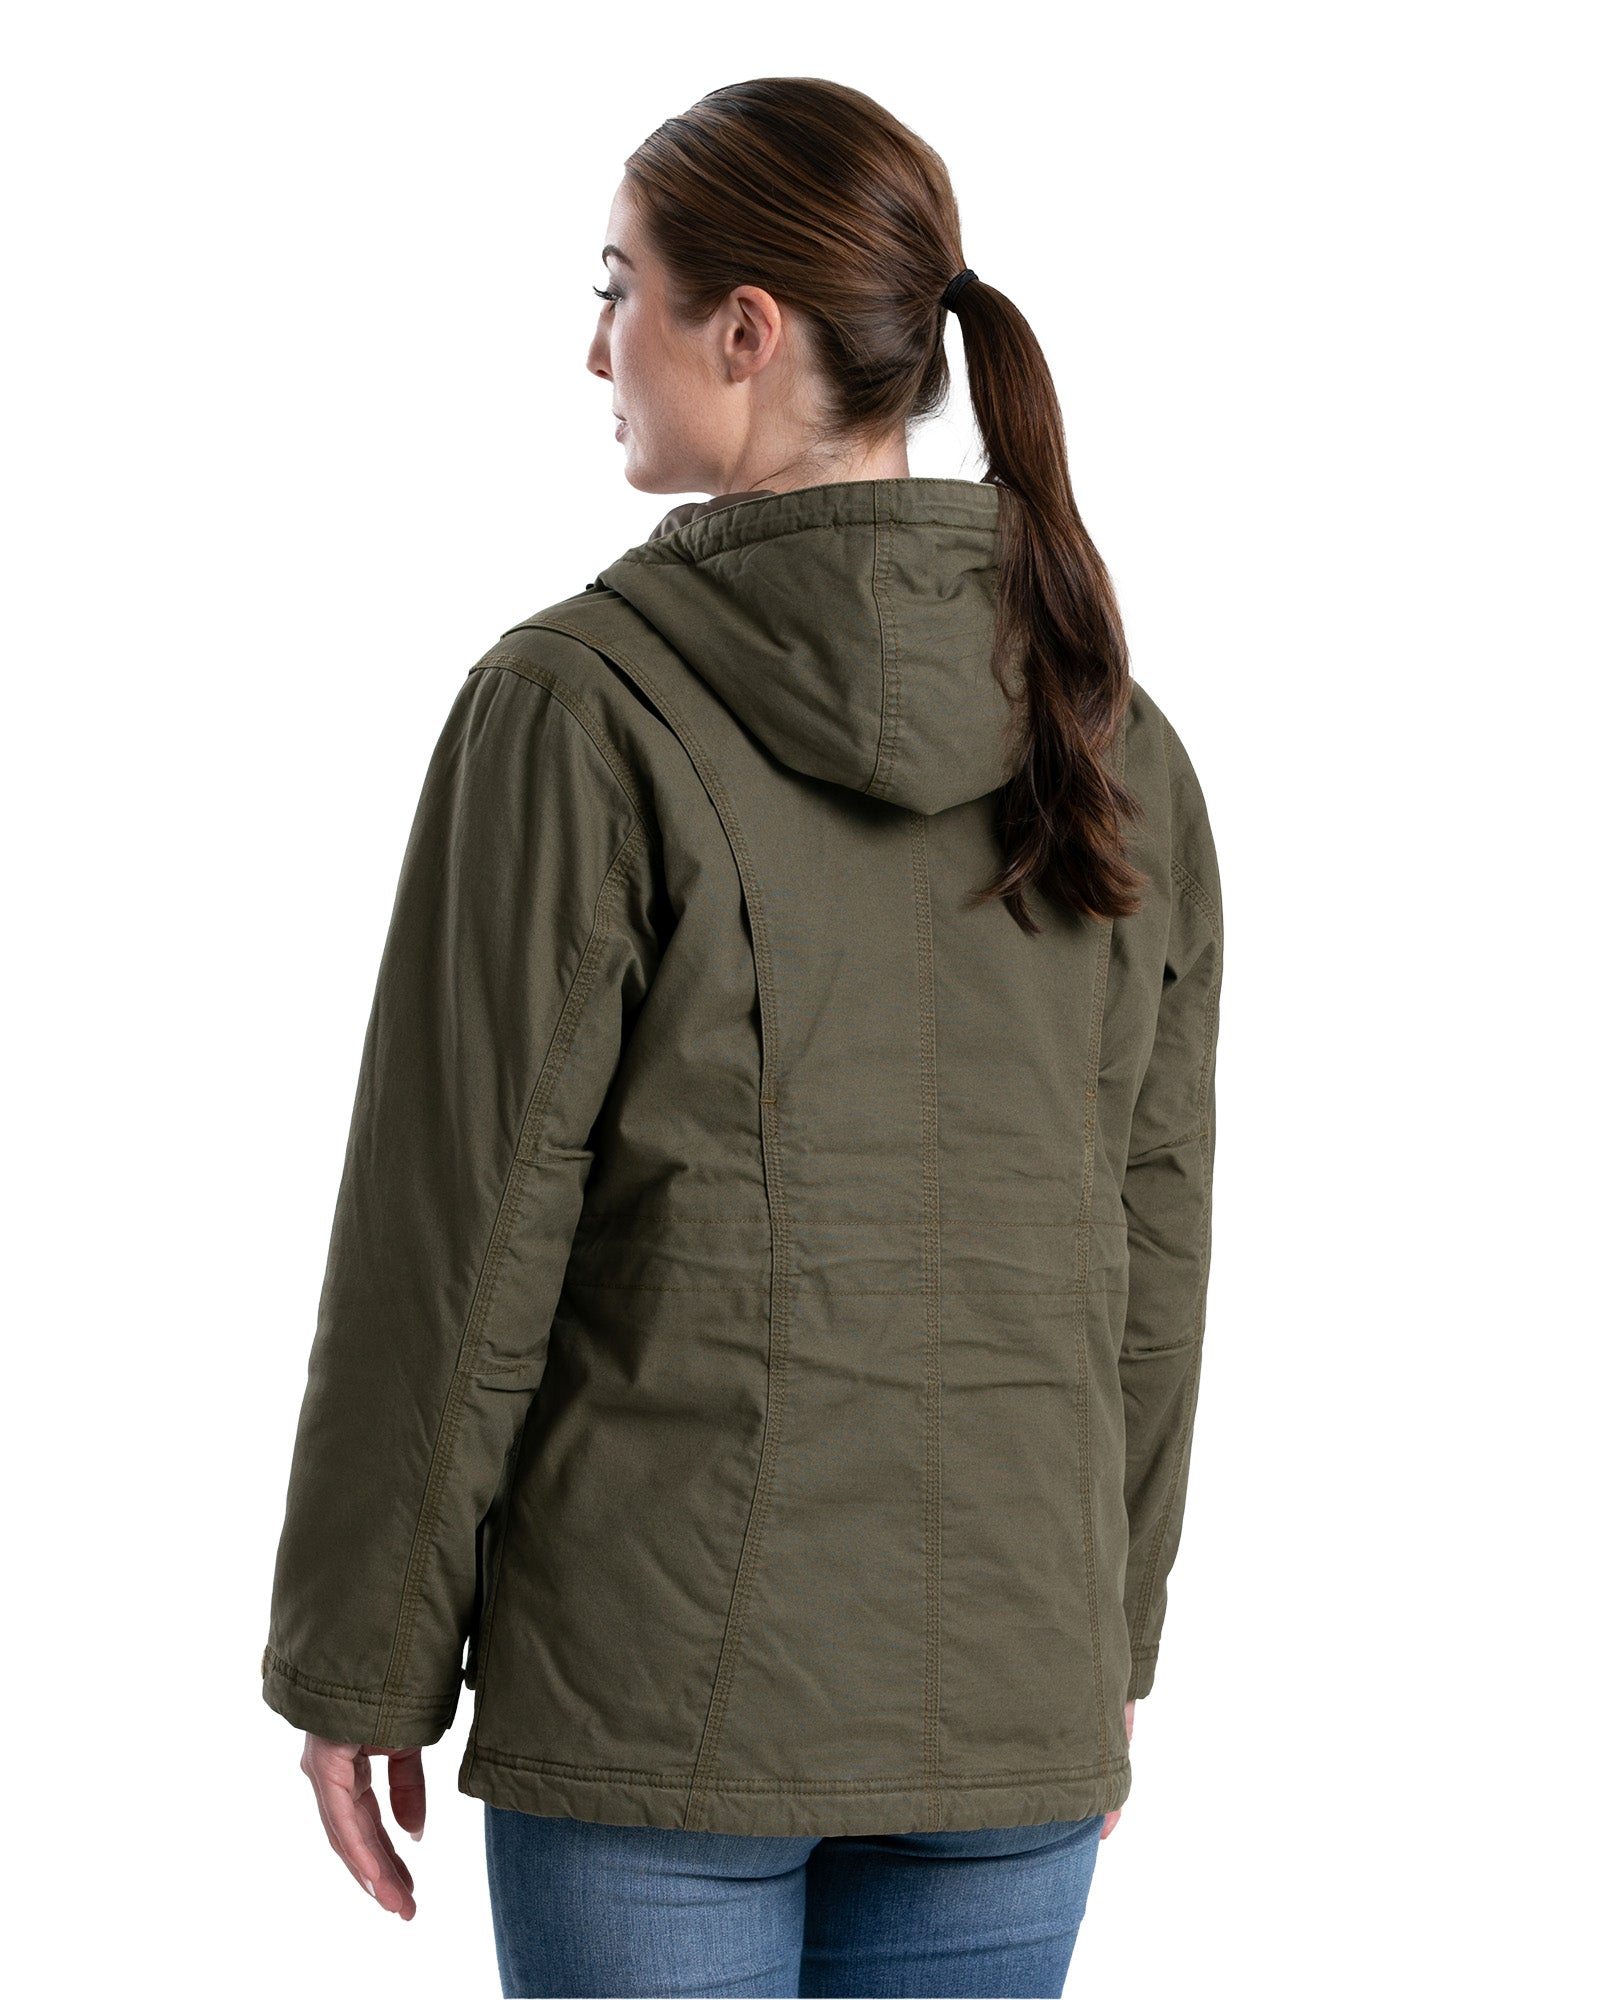 WCH68CDG Women's Softstone Washed Duck Utility Coat